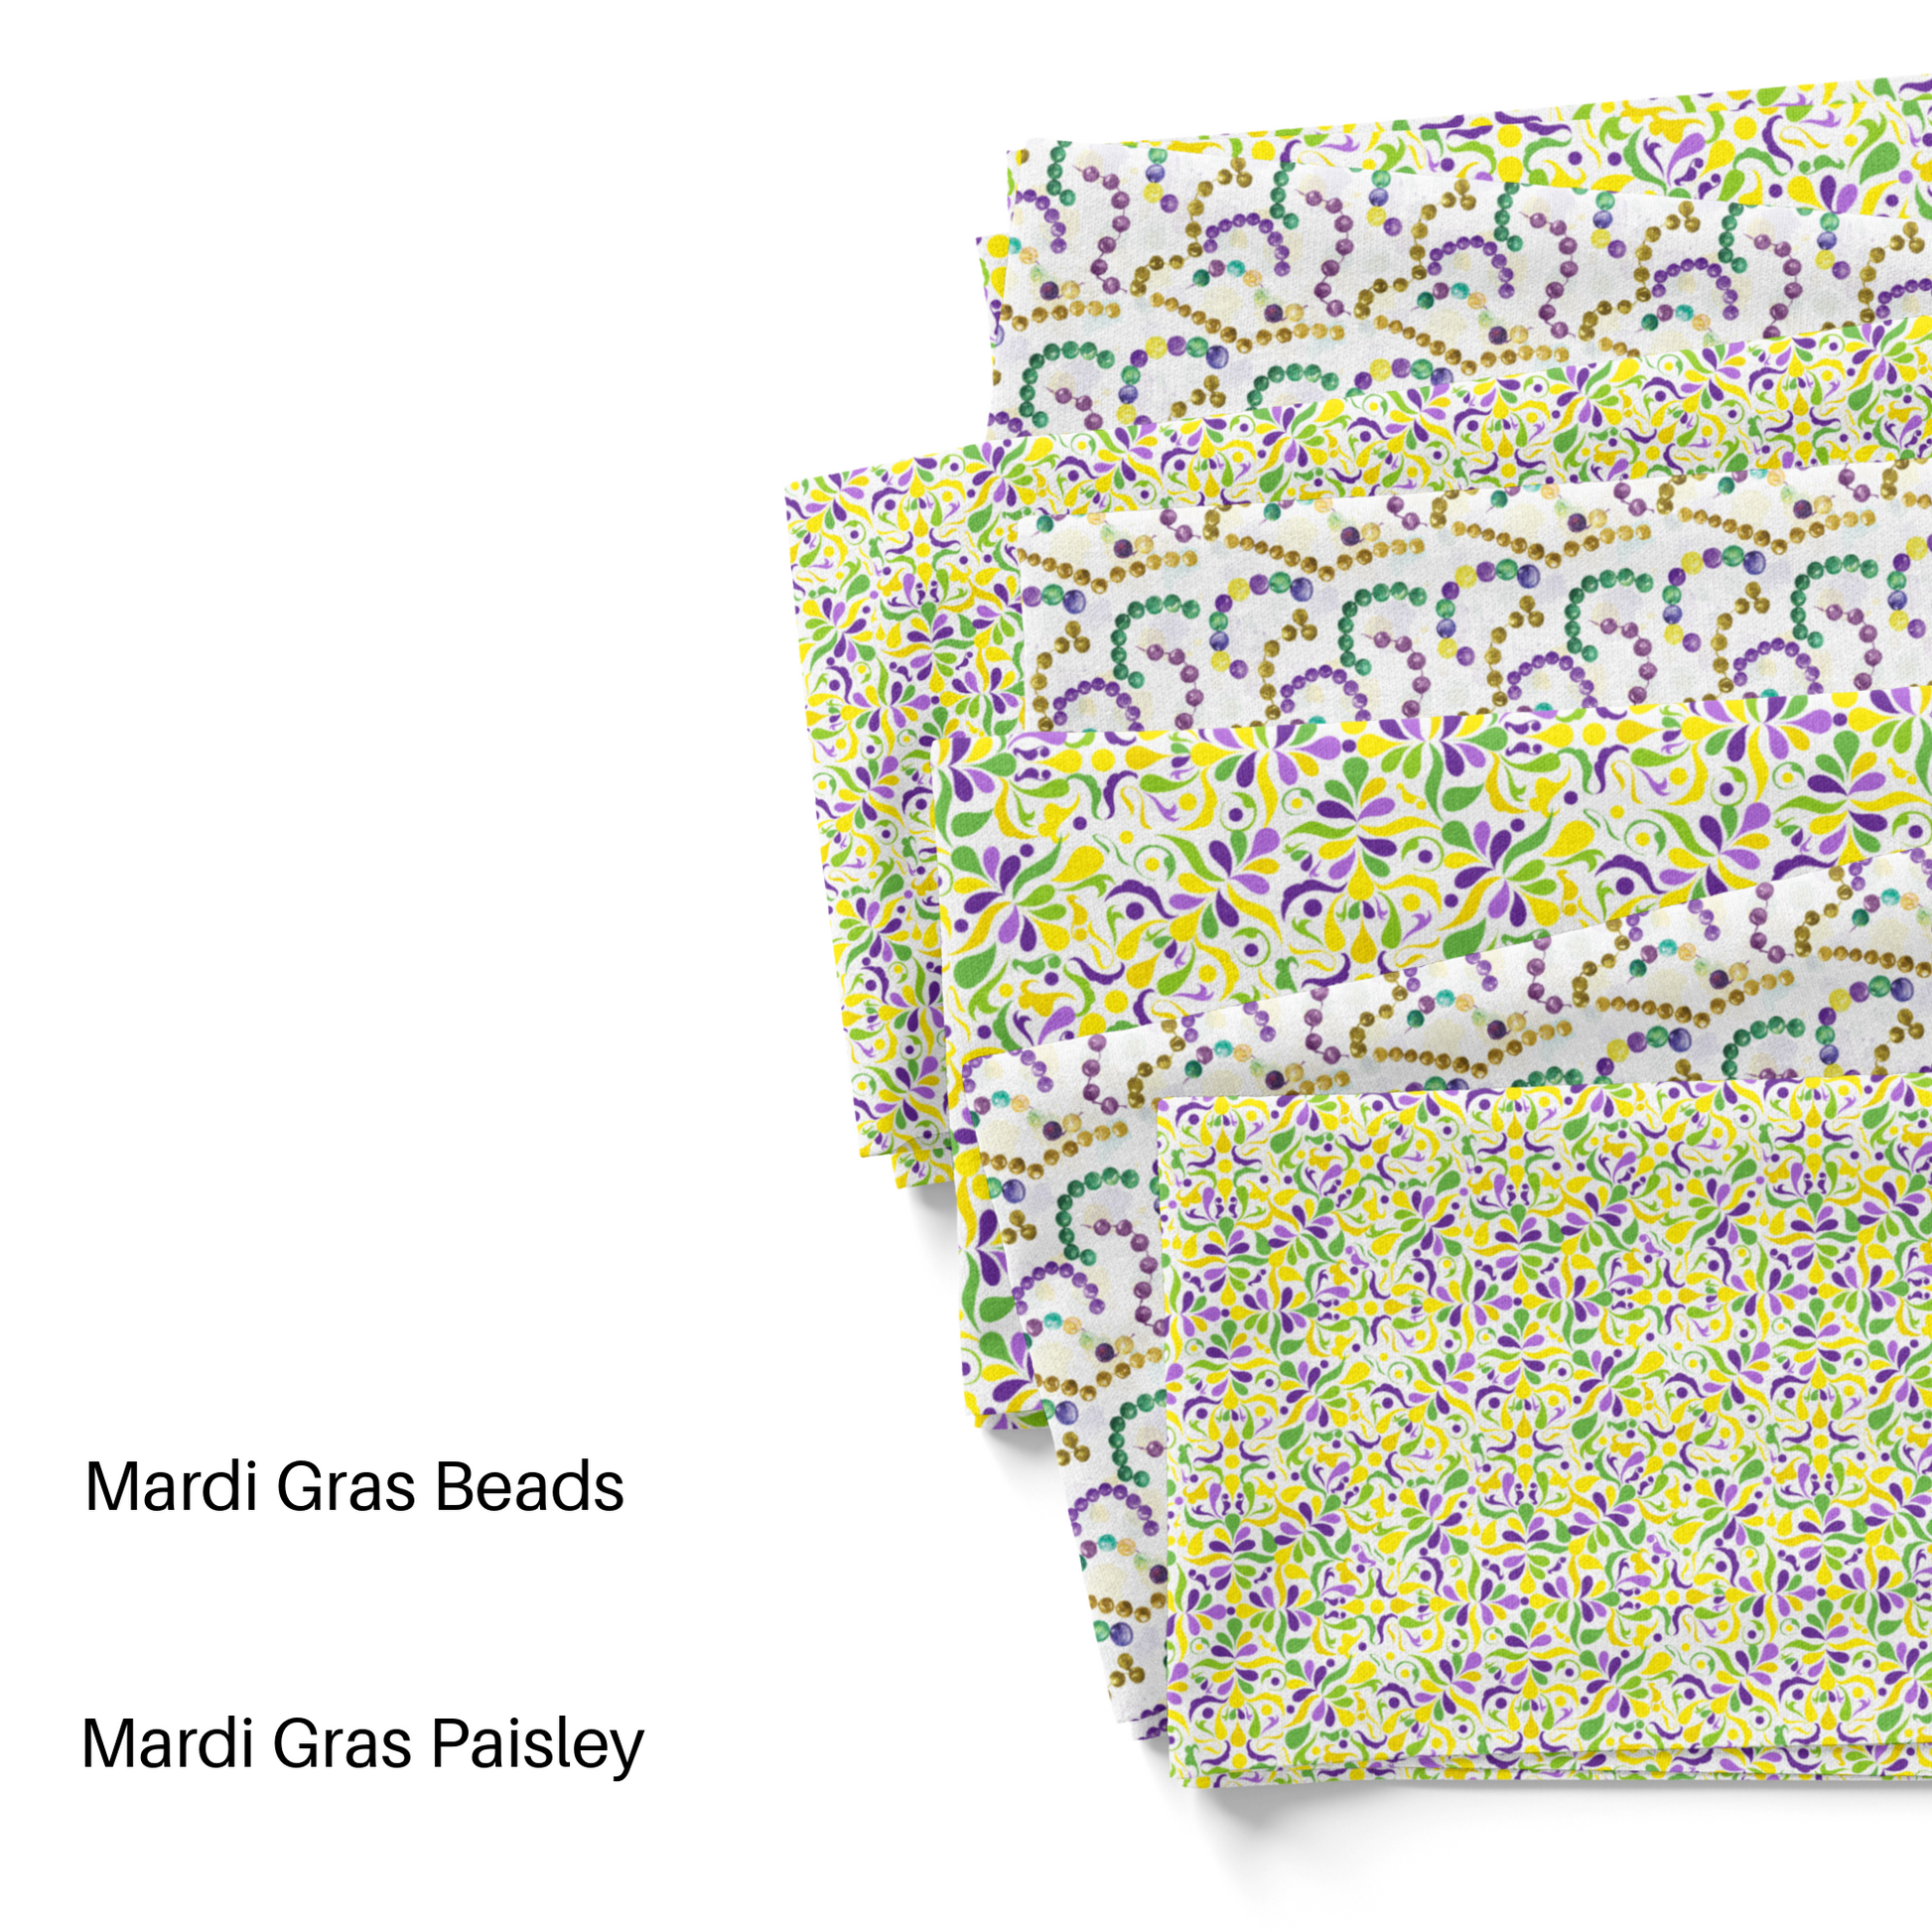 Mardi Gras Feathers and Beads New Orleans Holiday White Cotton Fabric